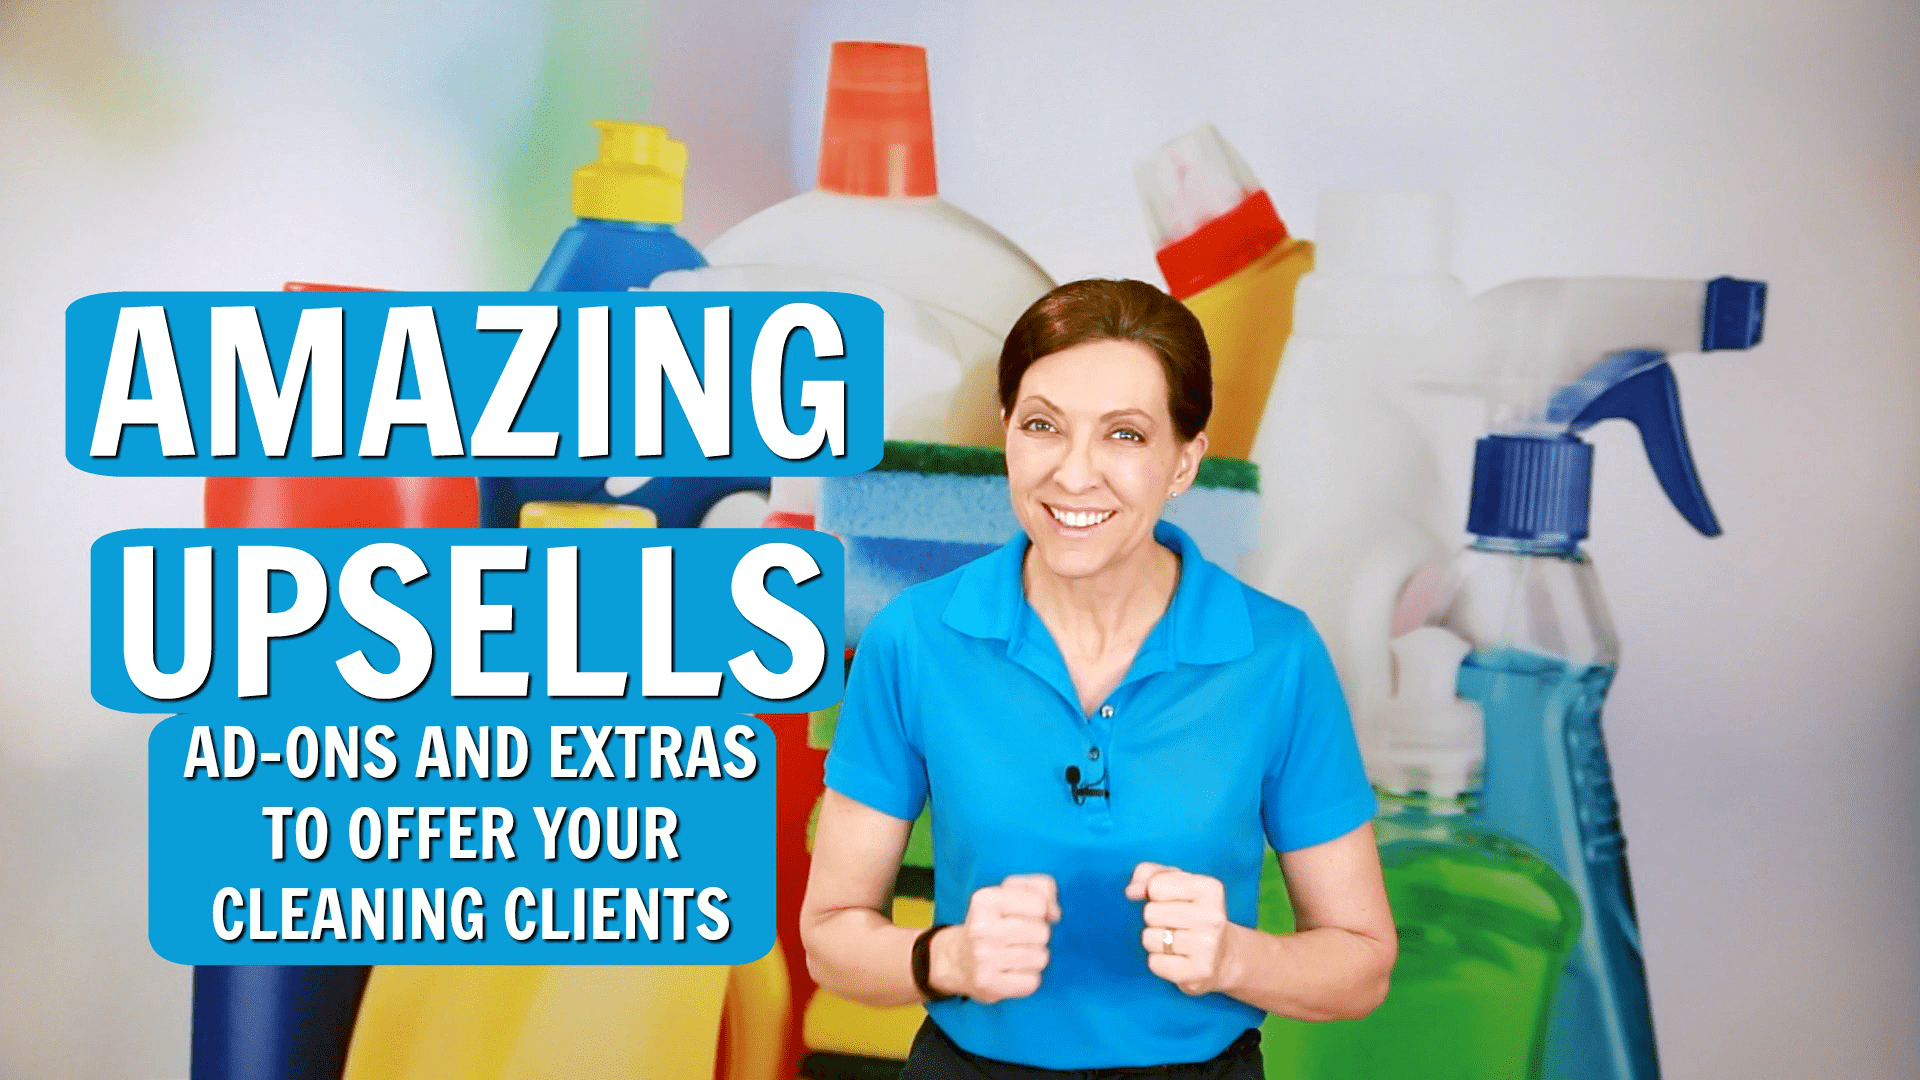 Amazing Upsells to Offer Your Cleaning Clients, Angela Brown